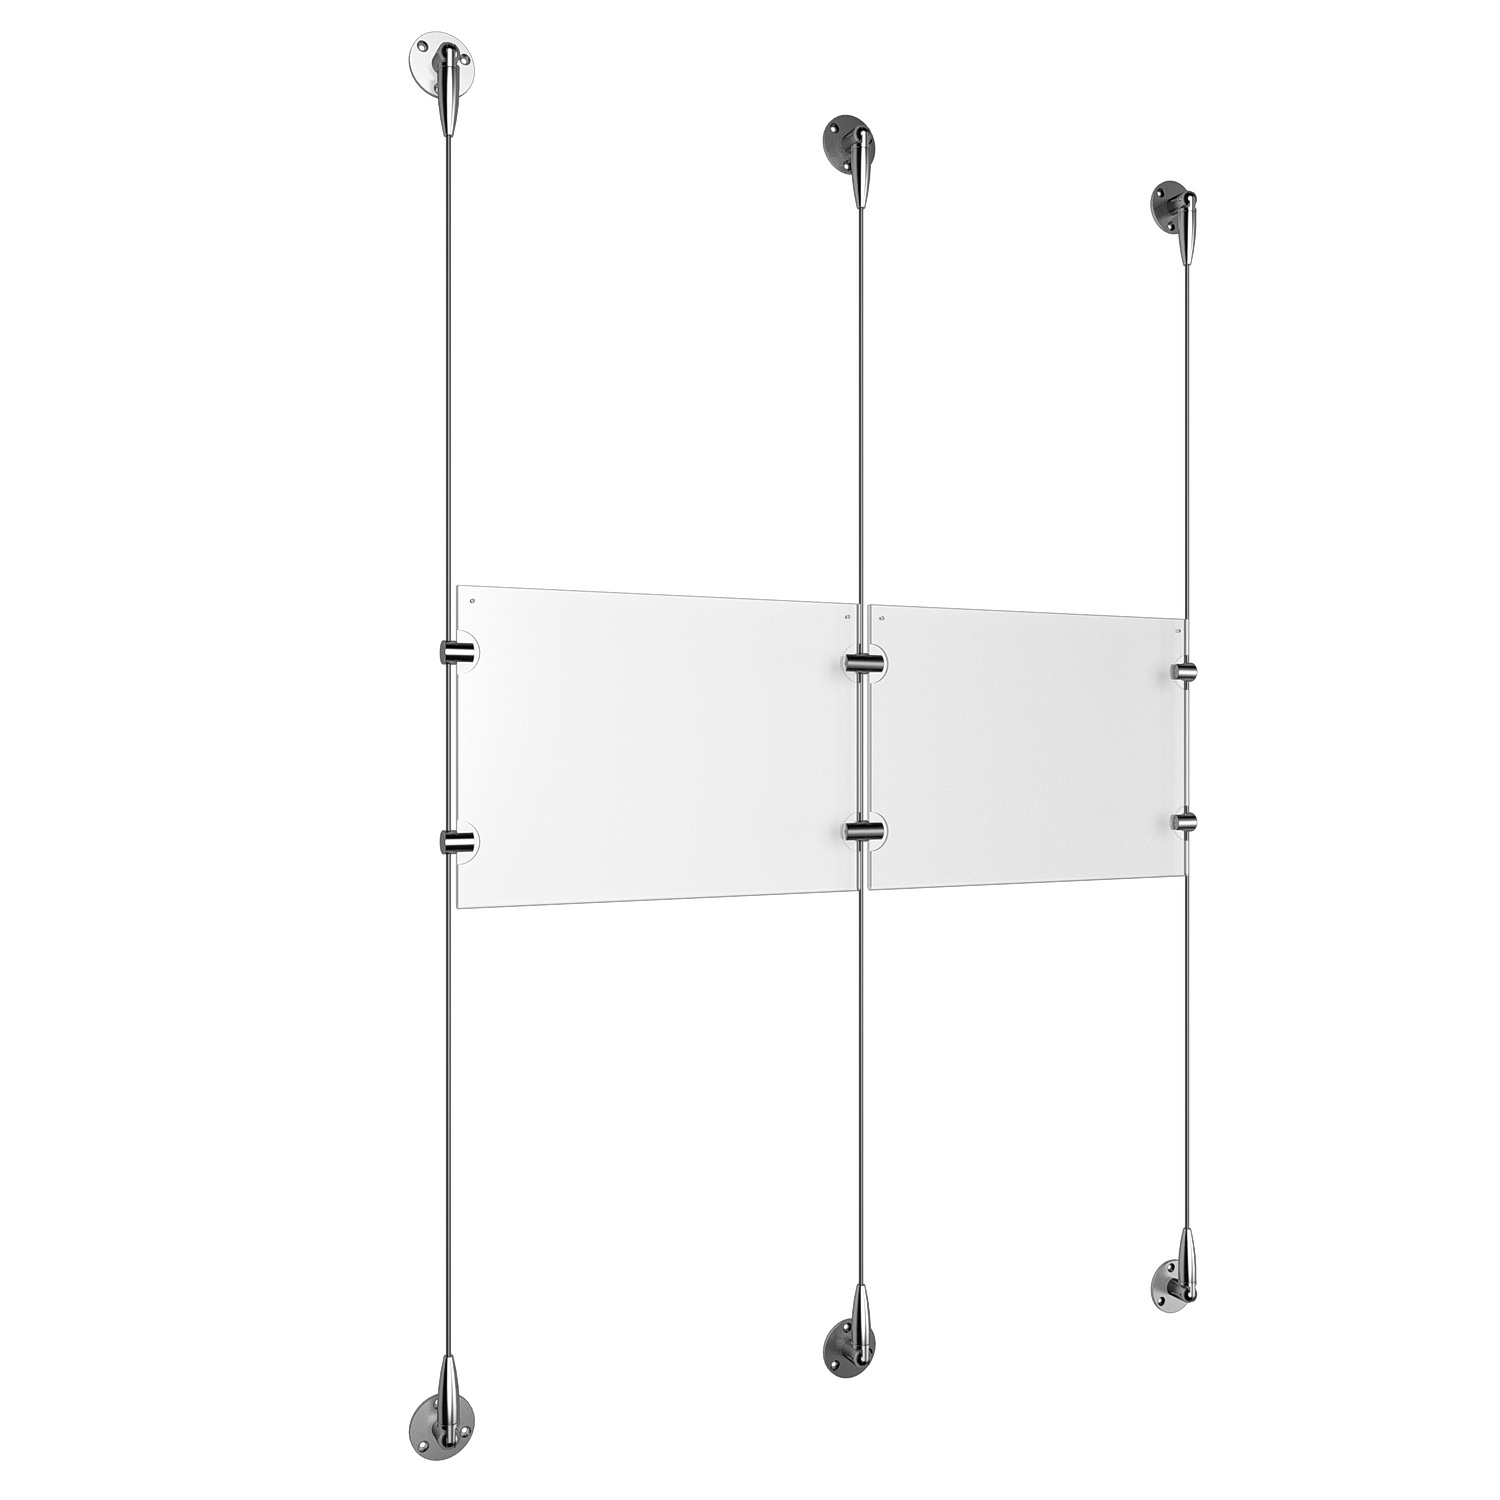 (2) 11'' Width x 8-1/2'' Height Clear Acrylic Frame & (3) Stainless Steel Satin Brushed Adjustable Angle Signature 1/8'' Cable Systems with (4) Single-Sided Panel Grippers (2) Double-Sided Panel Grippers